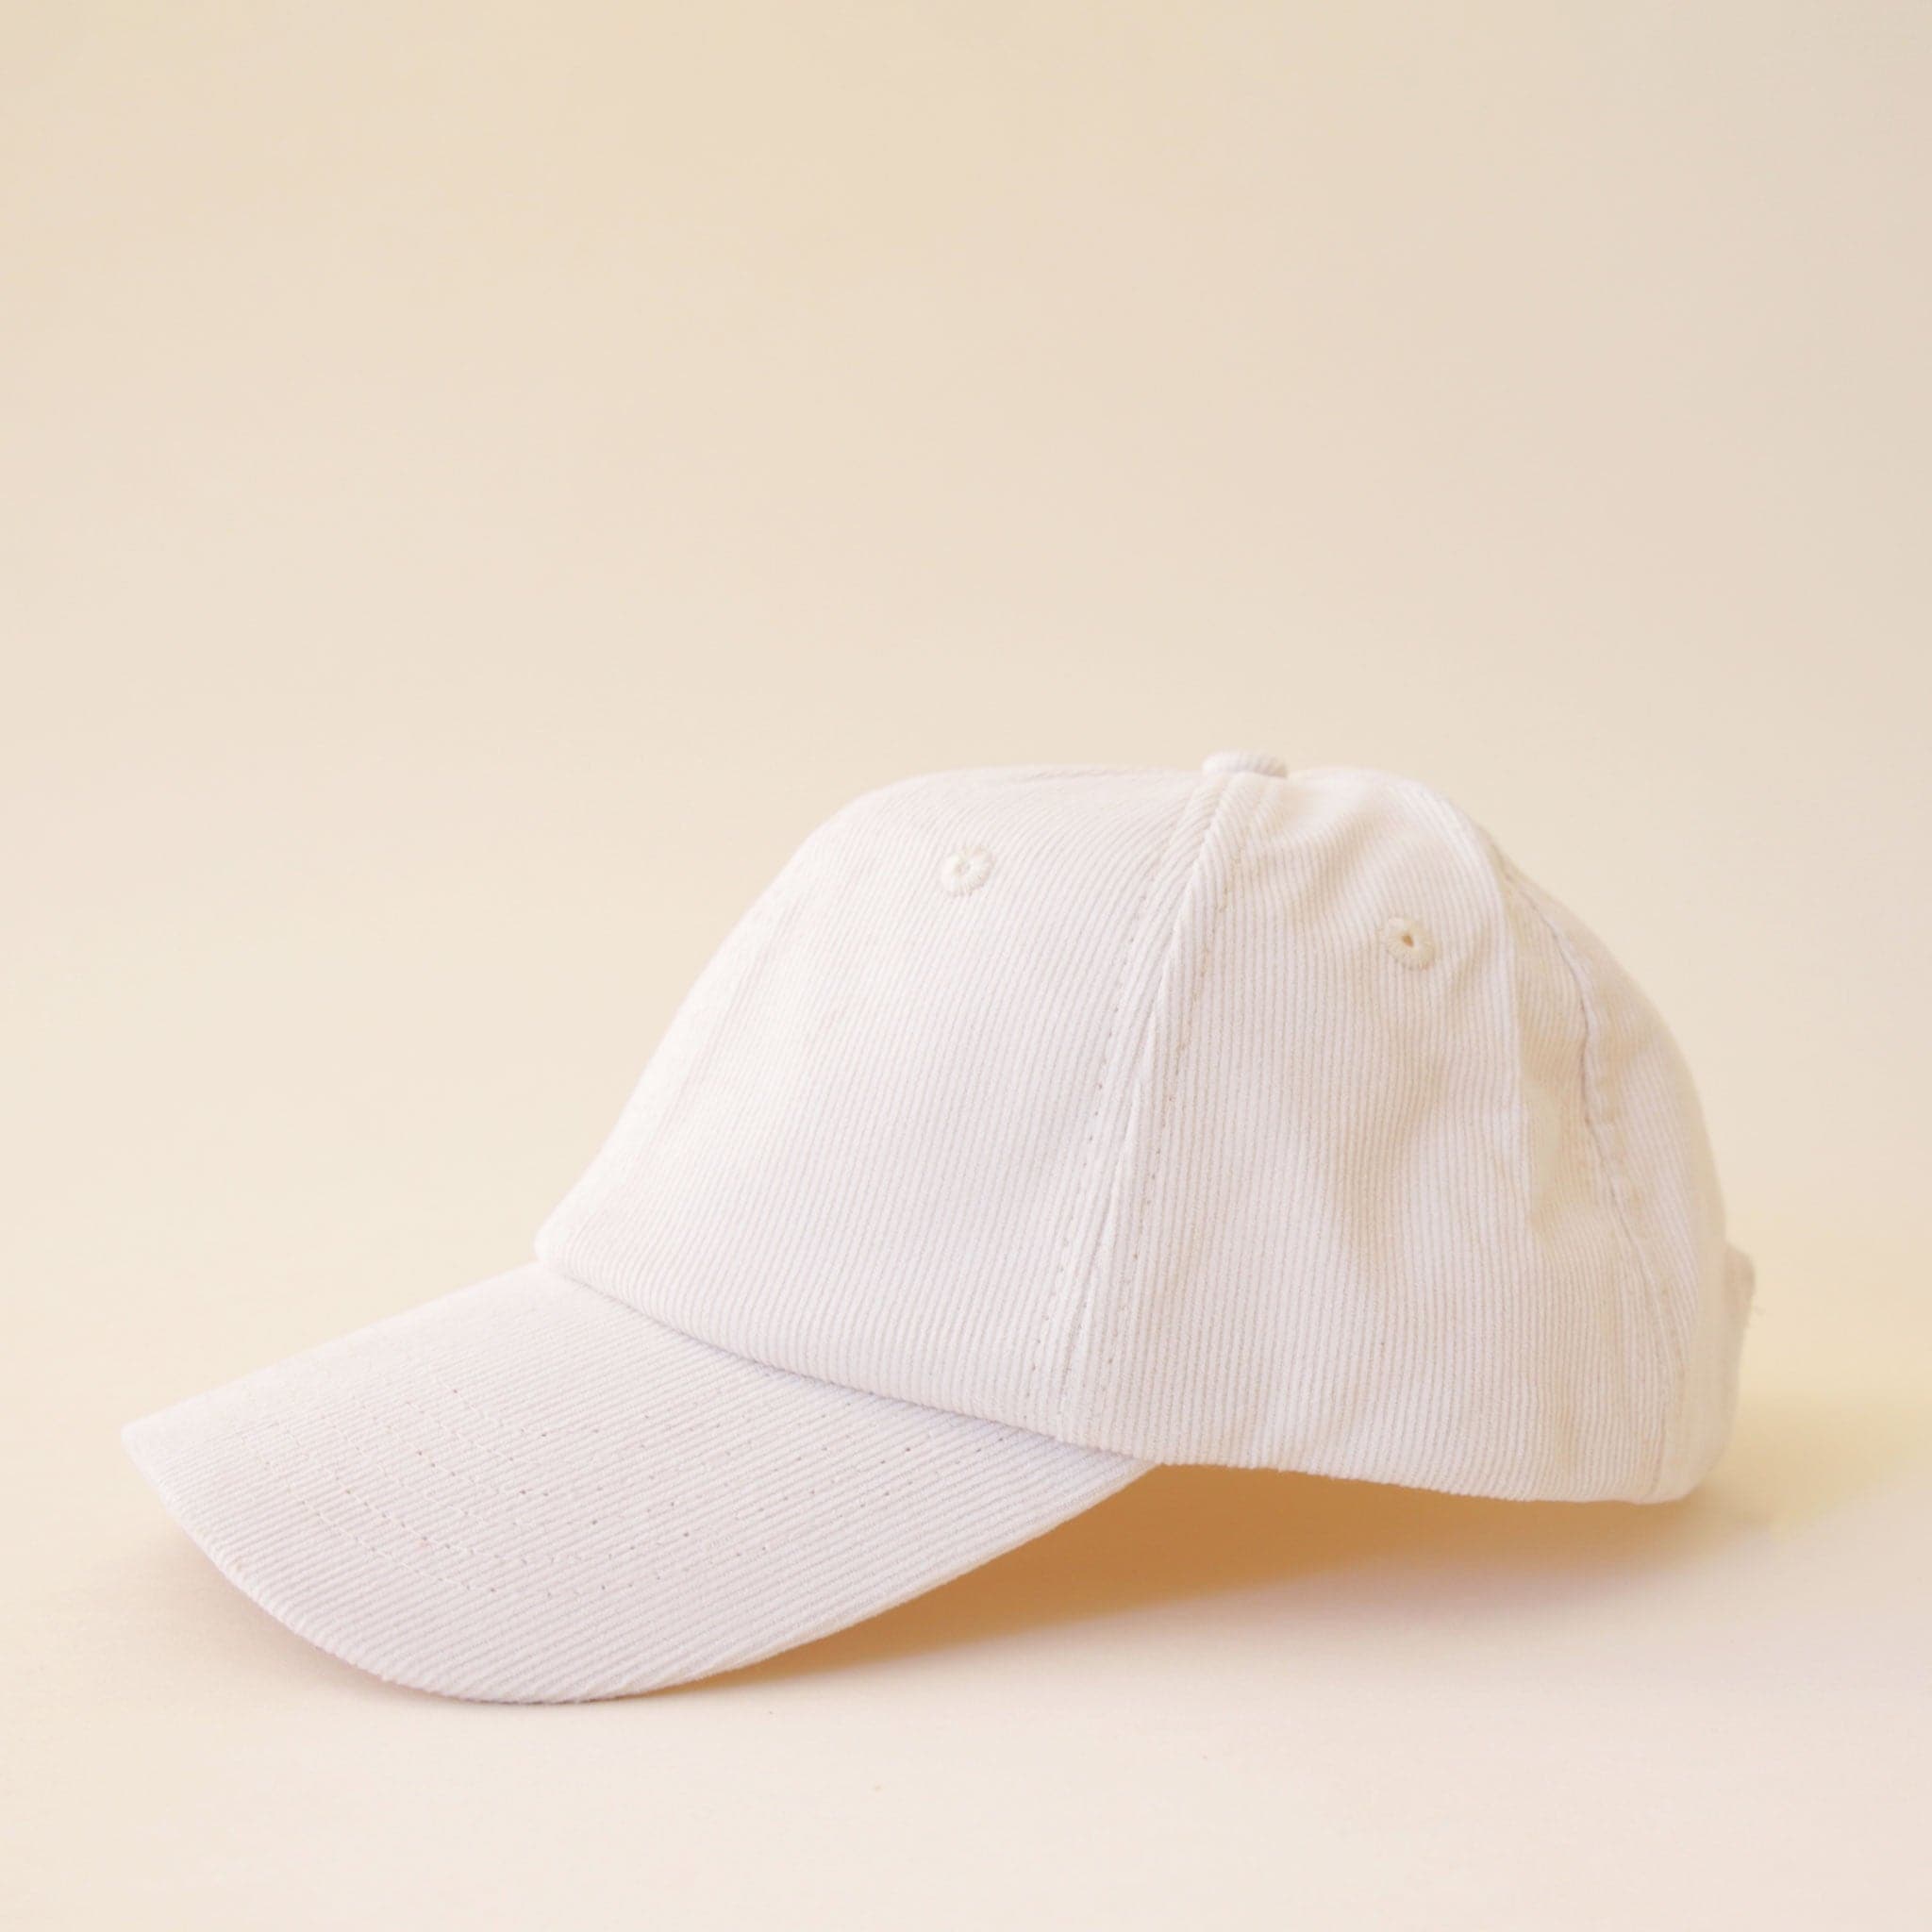 An ivory corduroy baseball hat with a curved bill.